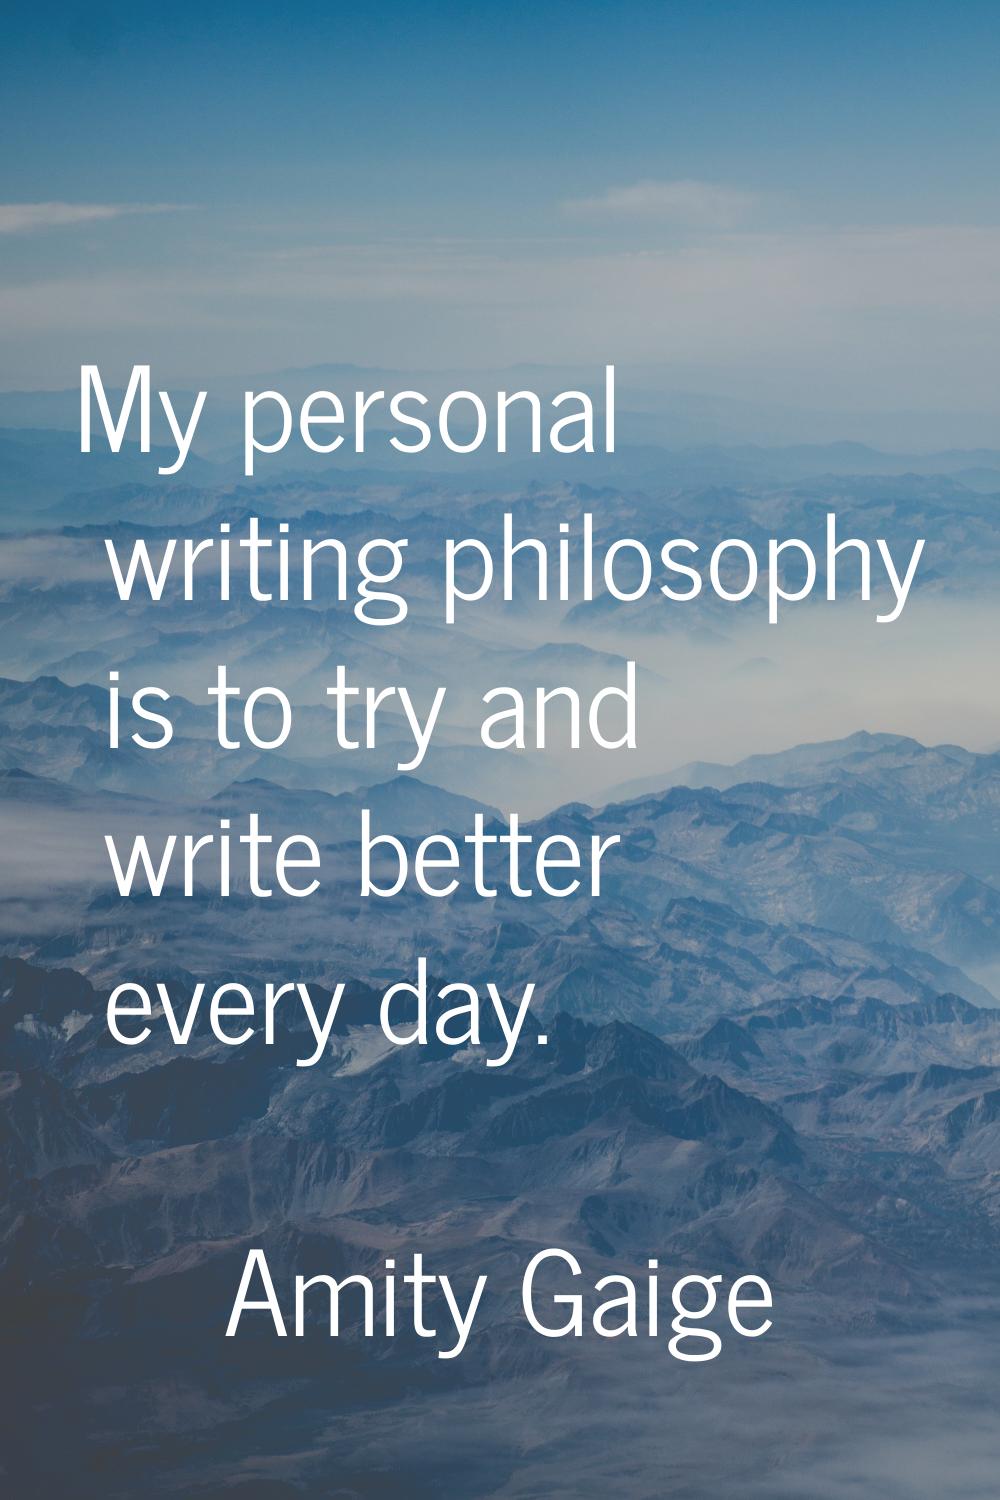 My personal writing philosophy is to try and write better every day.